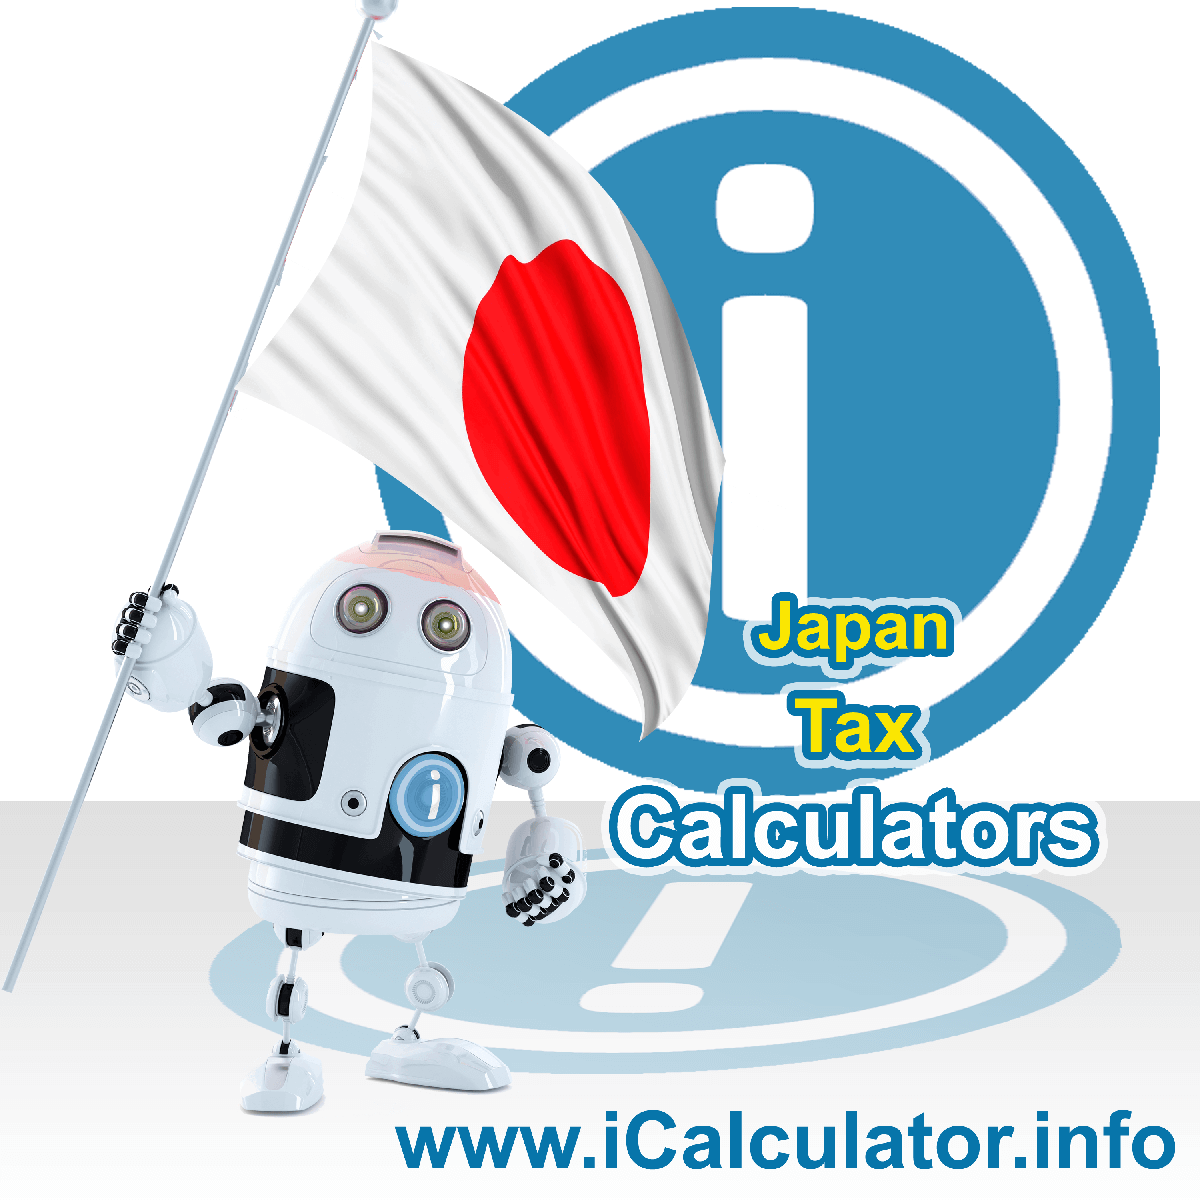 Japan Tax Calculator. This image shows the Japanese flag and information relating to the tax formula for the Japan Tax Calculator